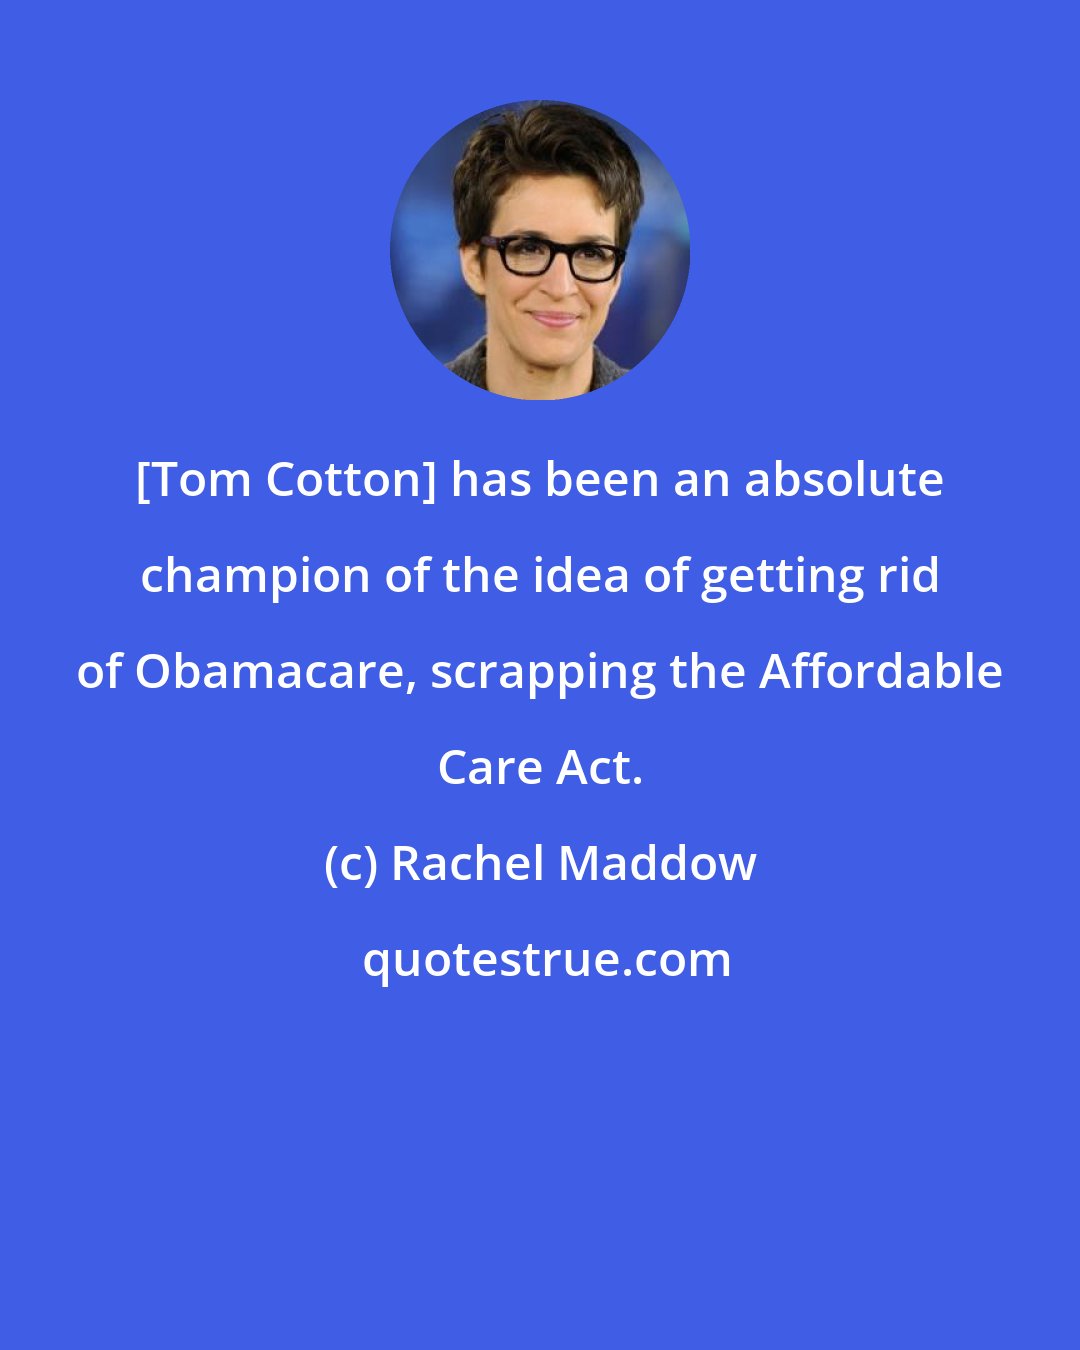 Rachel Maddow: [Tom Cotton] has been an absolute champion of the idea of getting rid of Obamacare, scrapping the Affordable Care Act.